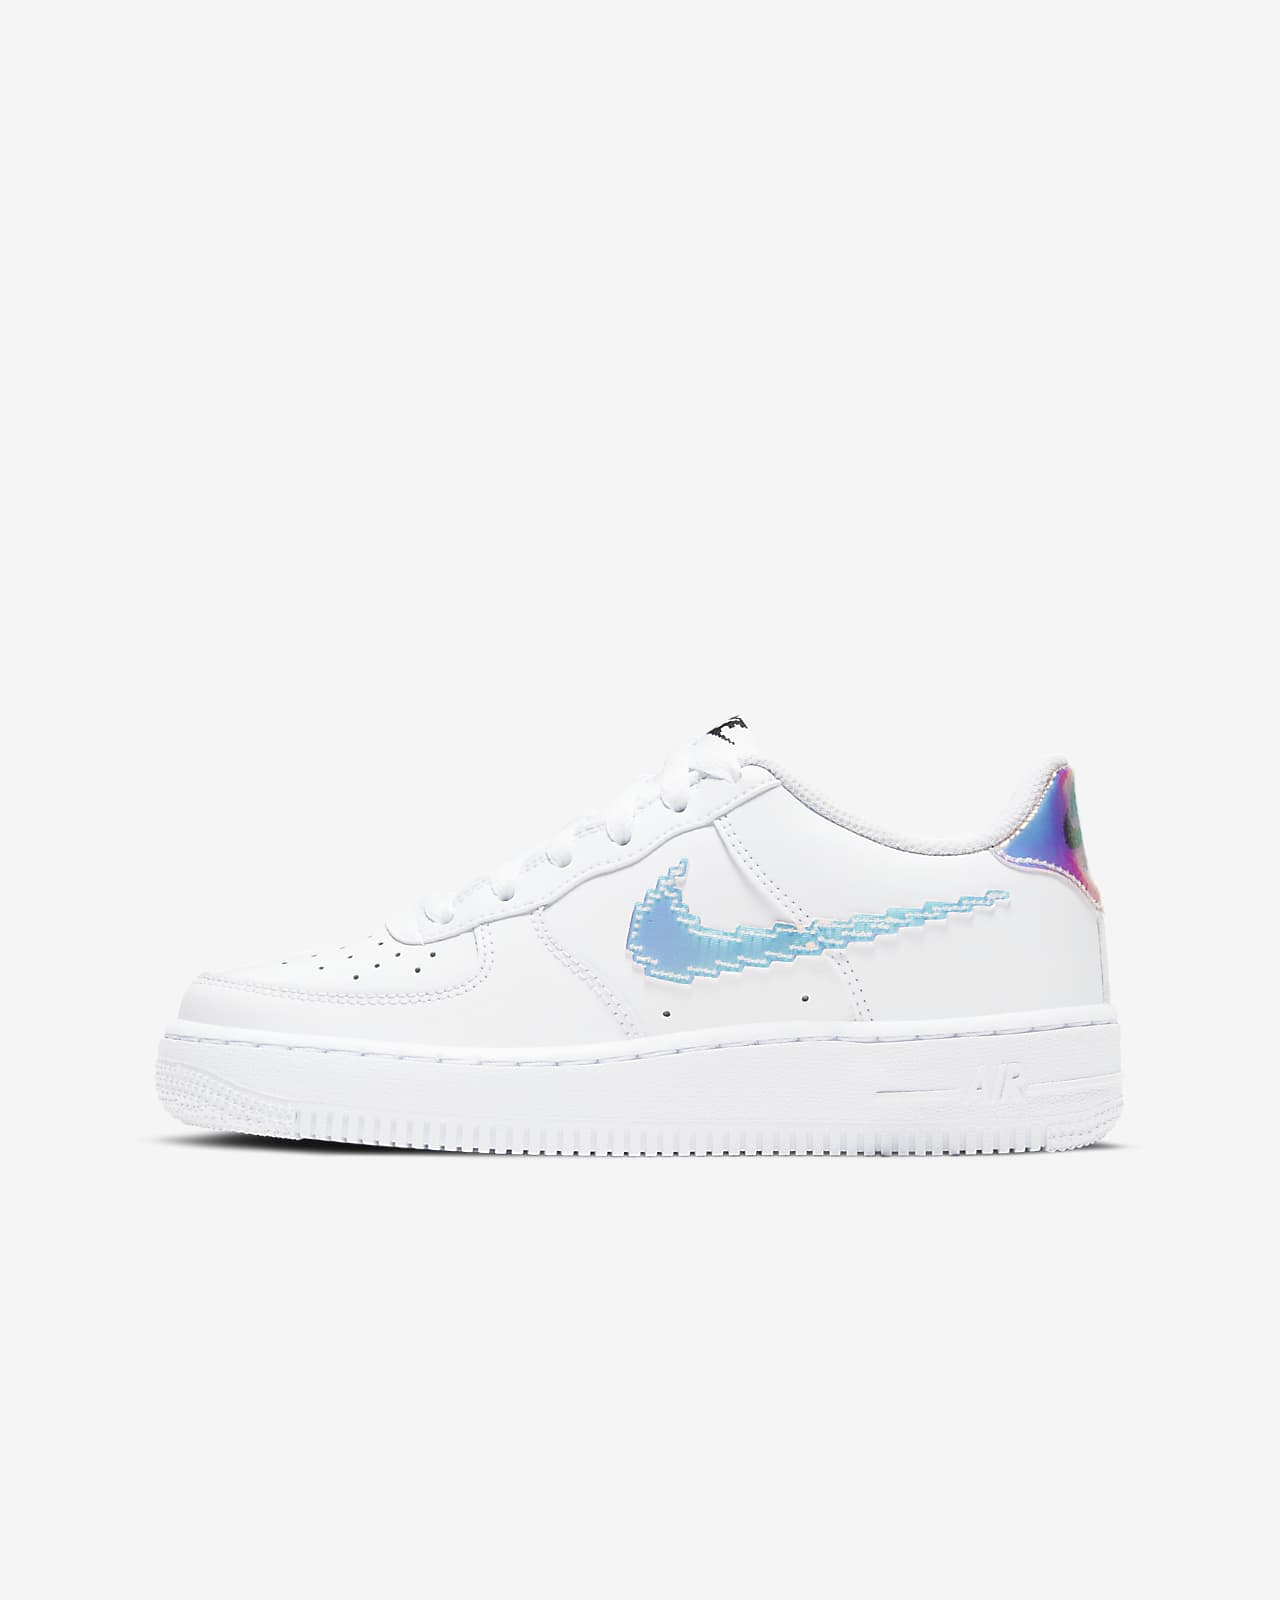  Nike Youth Air Force 1 LV8 (GS) CW1574 101 - Size | Basketball